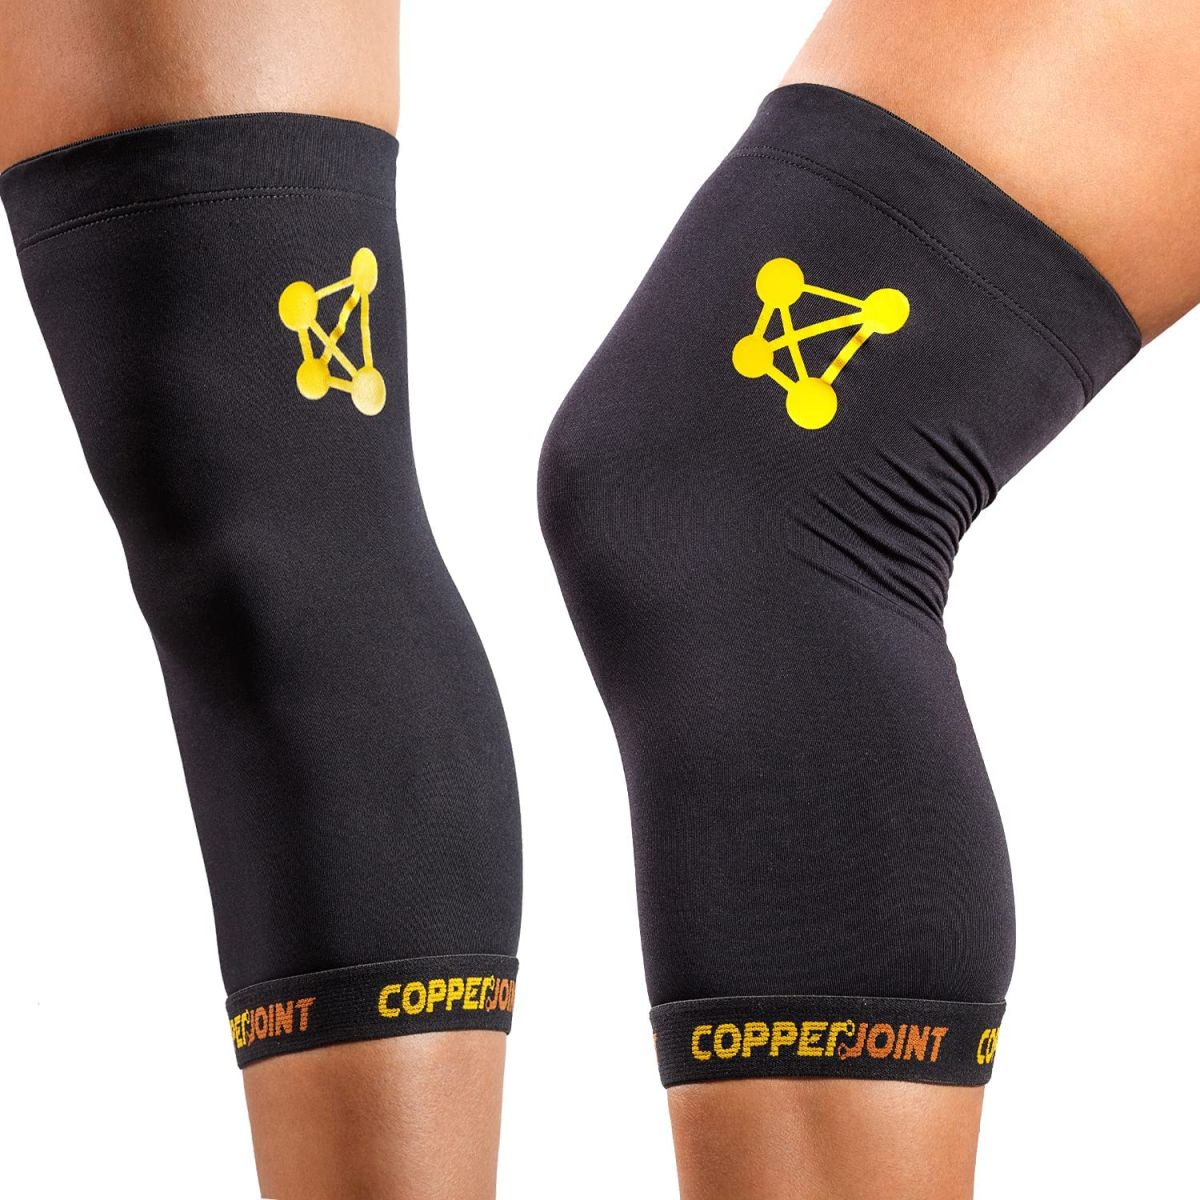 CopperJoint Knee Brace - Compression Knee Sleeve - Knee Support for Workout, Running, Weightlifting, Sport & Everyday Activities - Sleeves for Arthritis Pain, Swelling, & Support